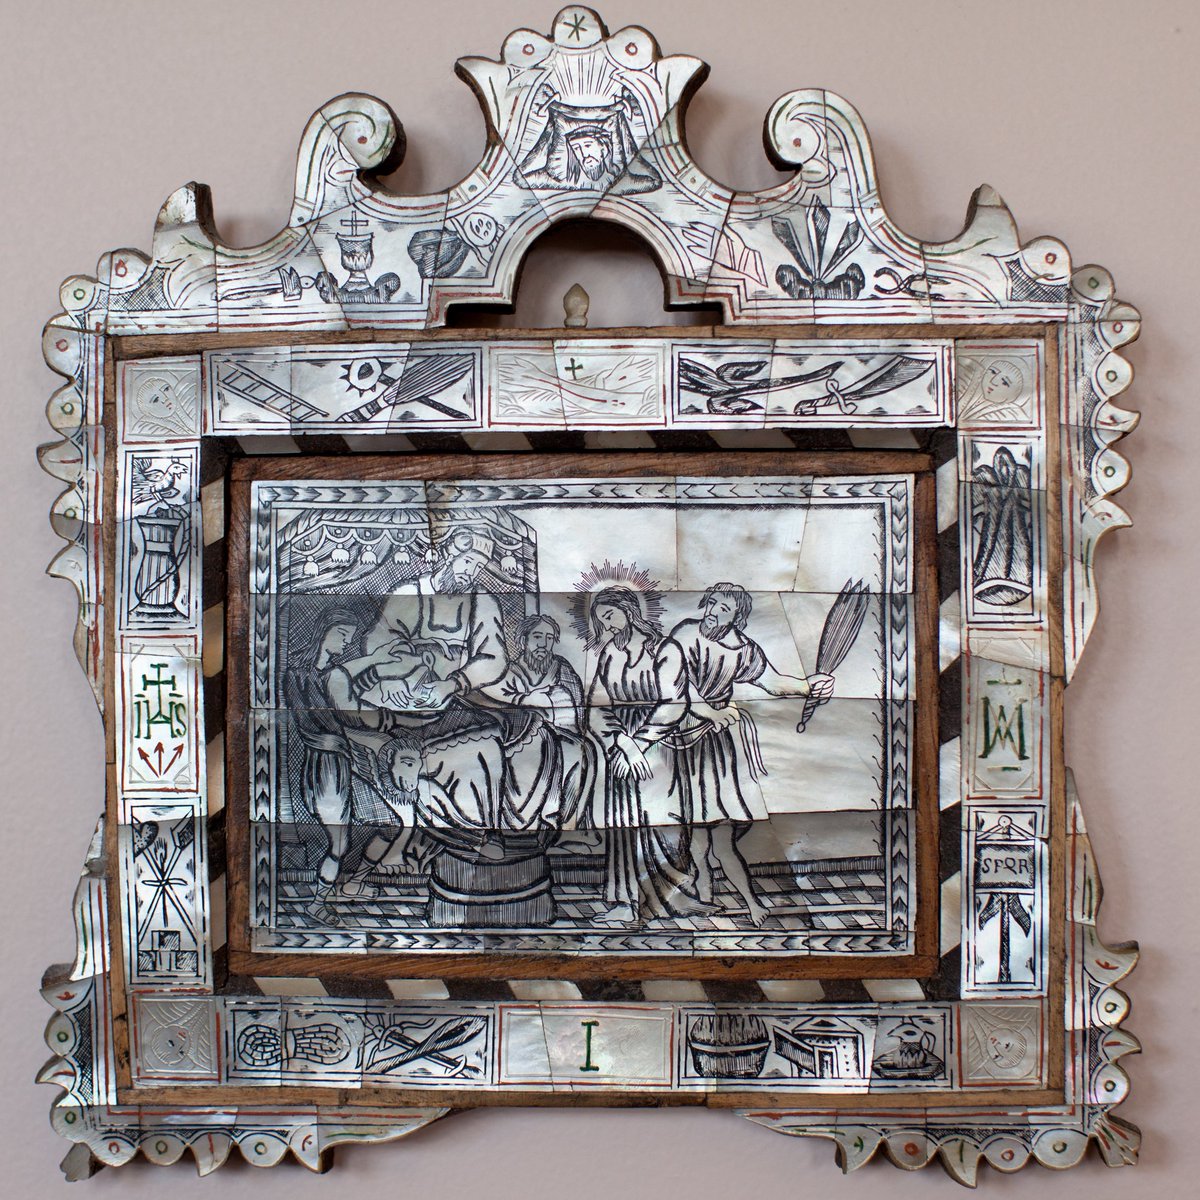 Celebrating Good Friday - 17th century Stations of the Cross were acquired for the chapel when it was restored to its Georgian glory in 1969. Engraved on mother-of-pearl from the Holy Land and arranged around the chapel to tell the story of the Passion and Crucifixion of Jesus.